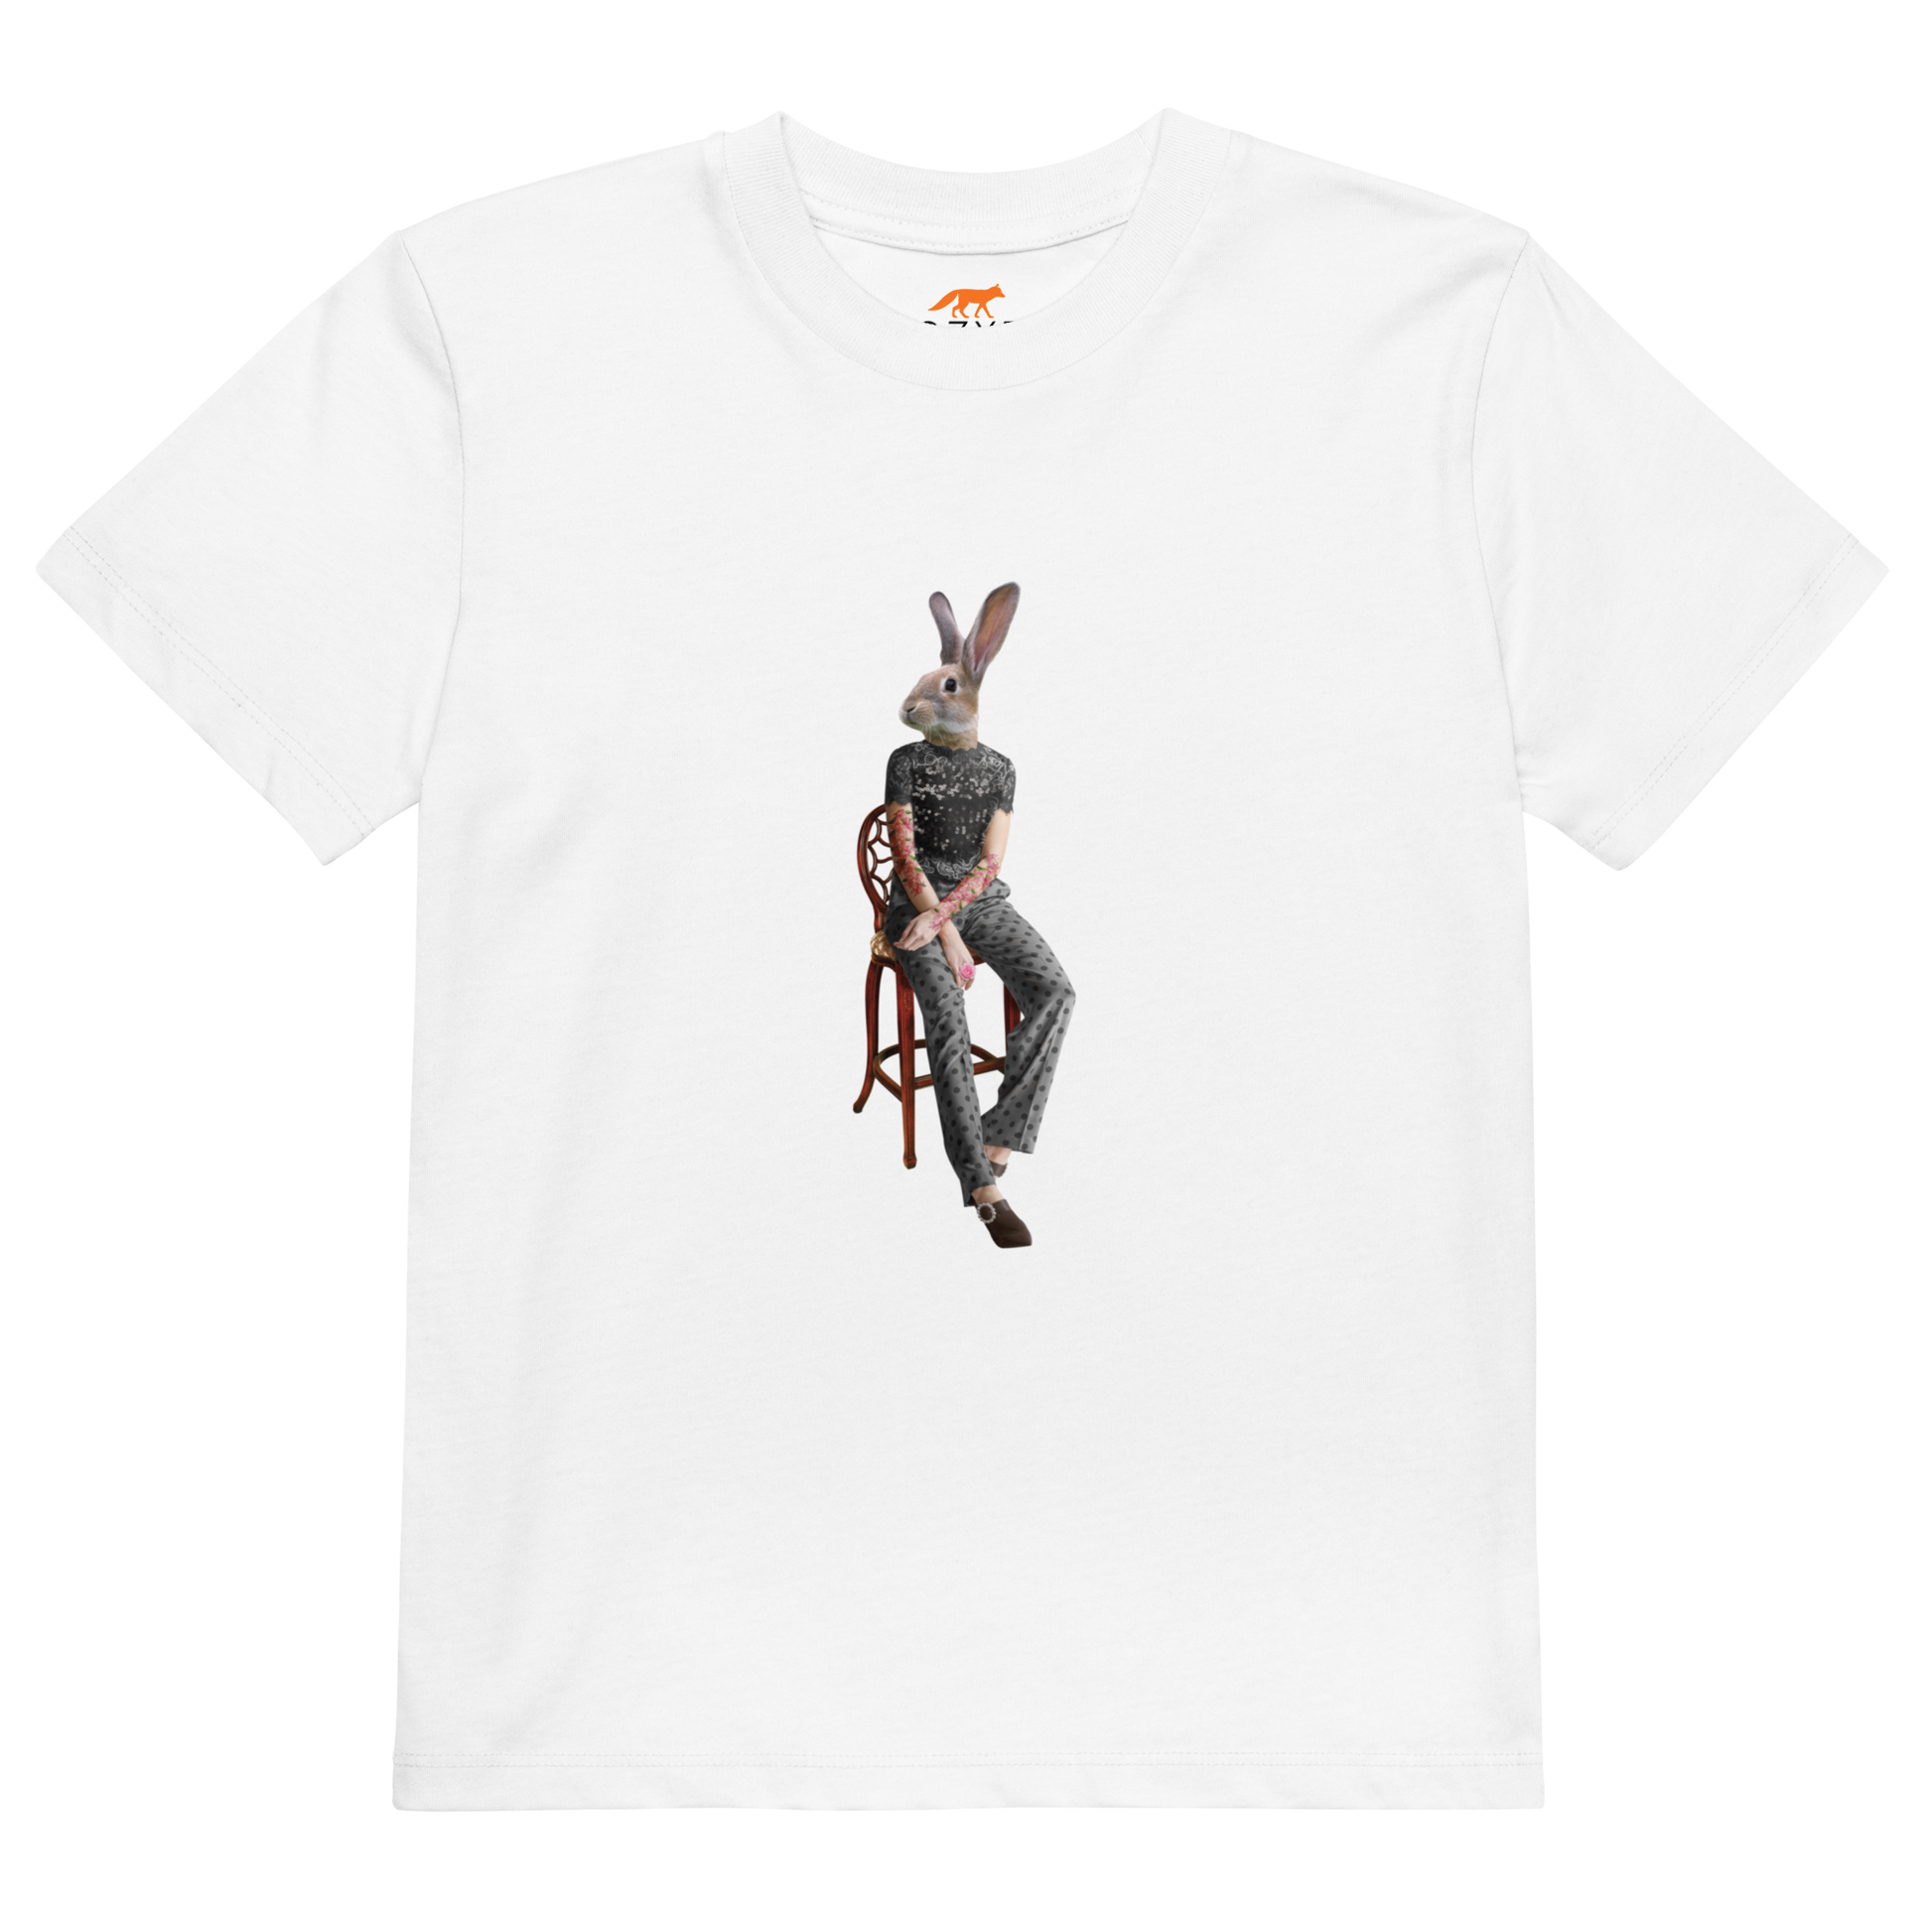 White Anthropomorphic Rabbit Organic Cotton Kids T-Shirt featuring an Anthropomorphic Rabbit graphic on the chest - Kids' Graphic Tees - Funny Animal T-Shirts - Boozy Fox